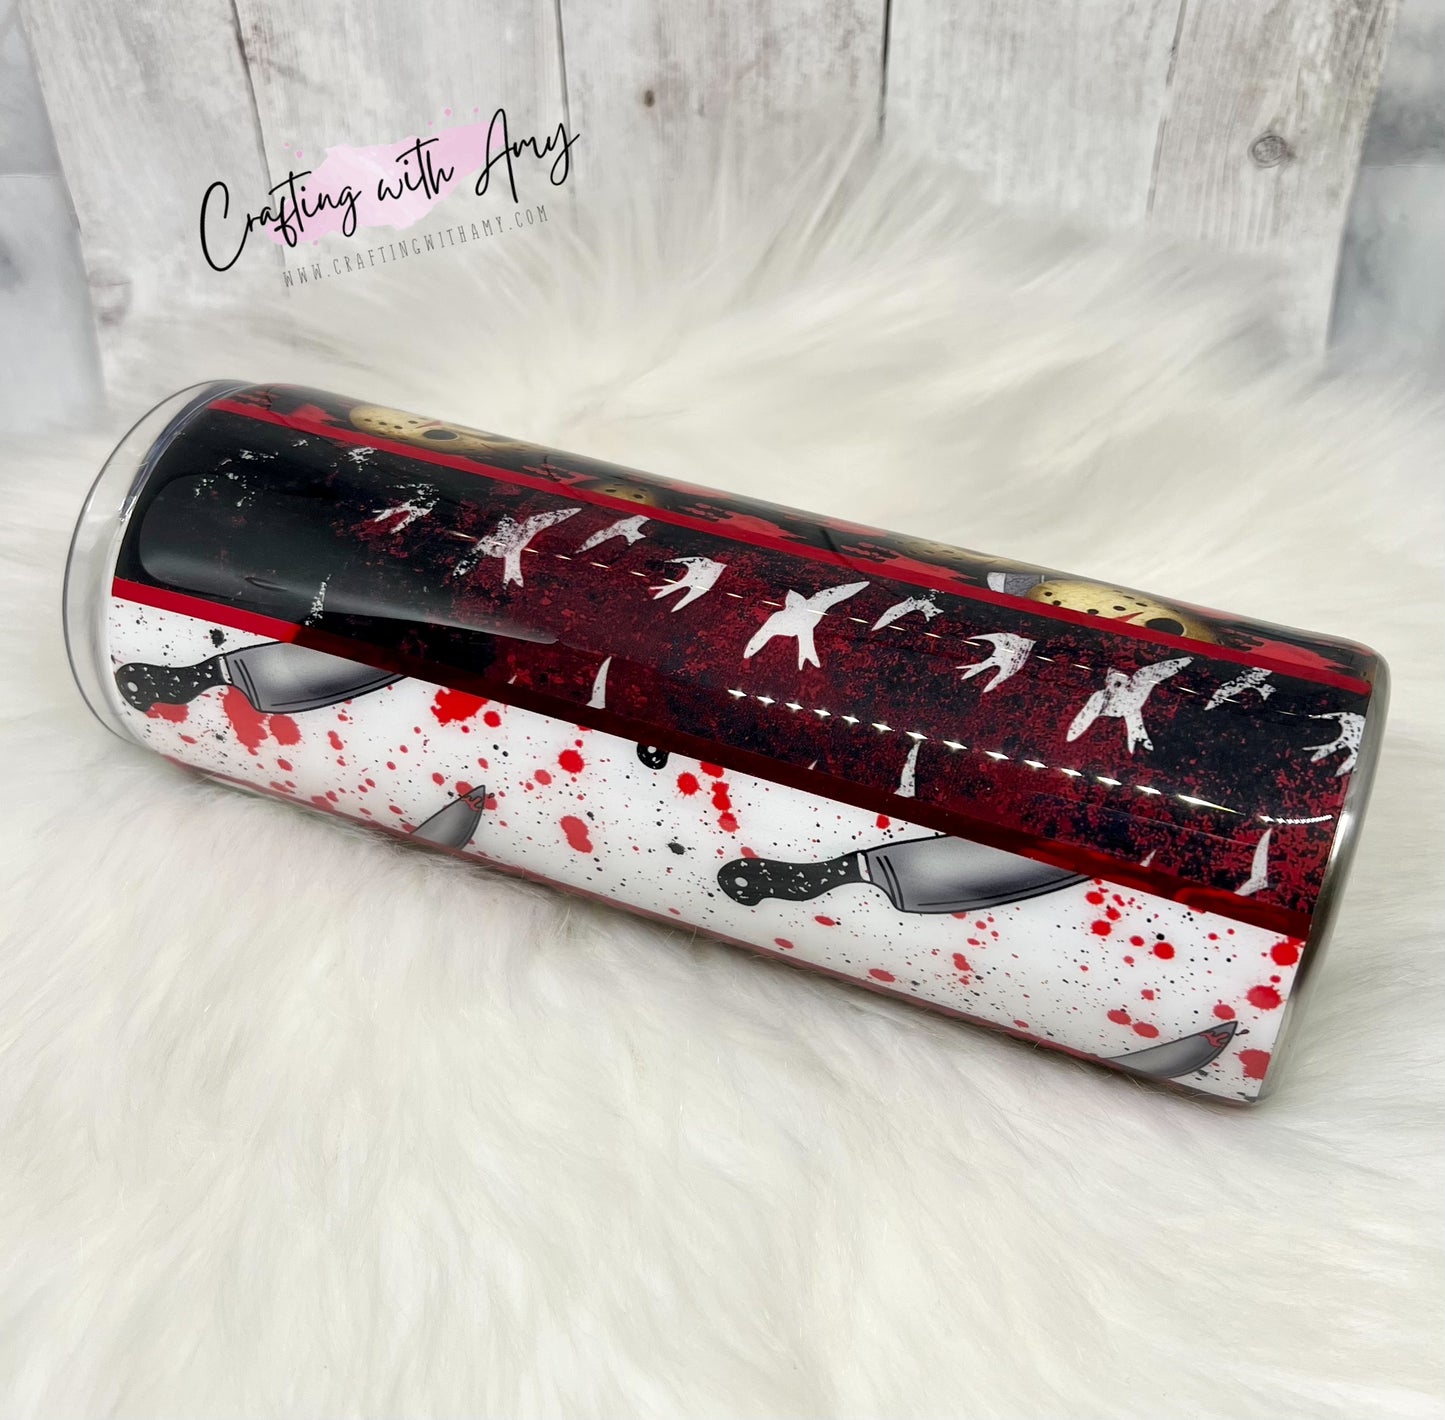 Horror Movie Tumbler, Pen and Badge Homder - CraftingwithAmy